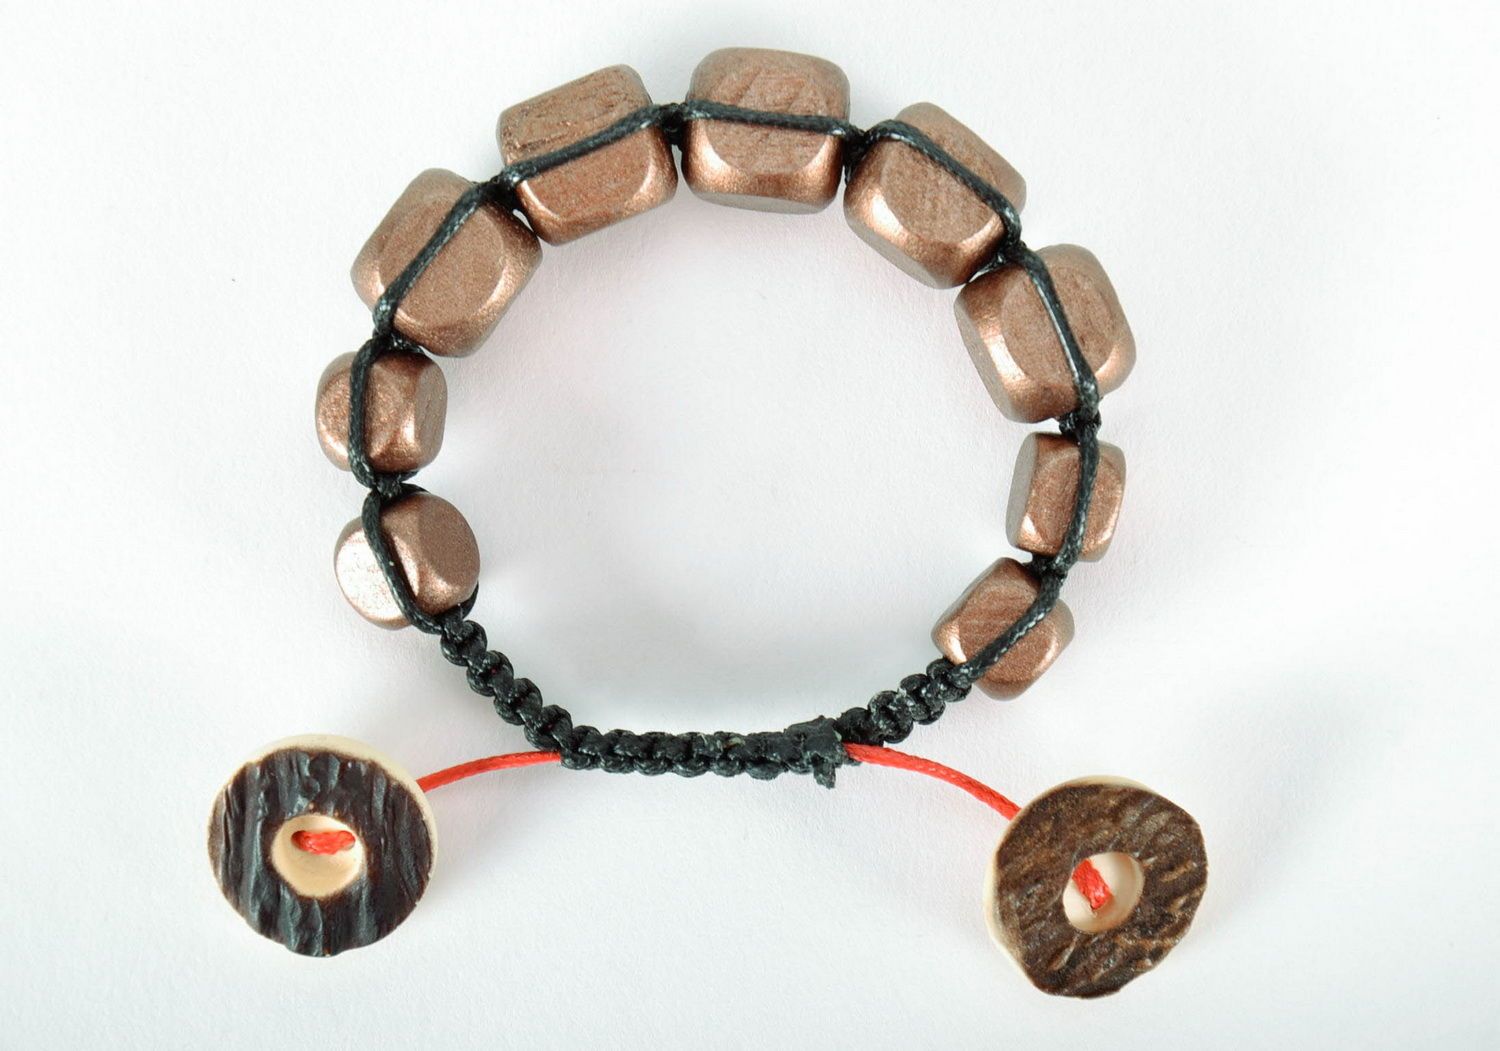 Bracelet made of wooden beads and plastic buttons photo 3